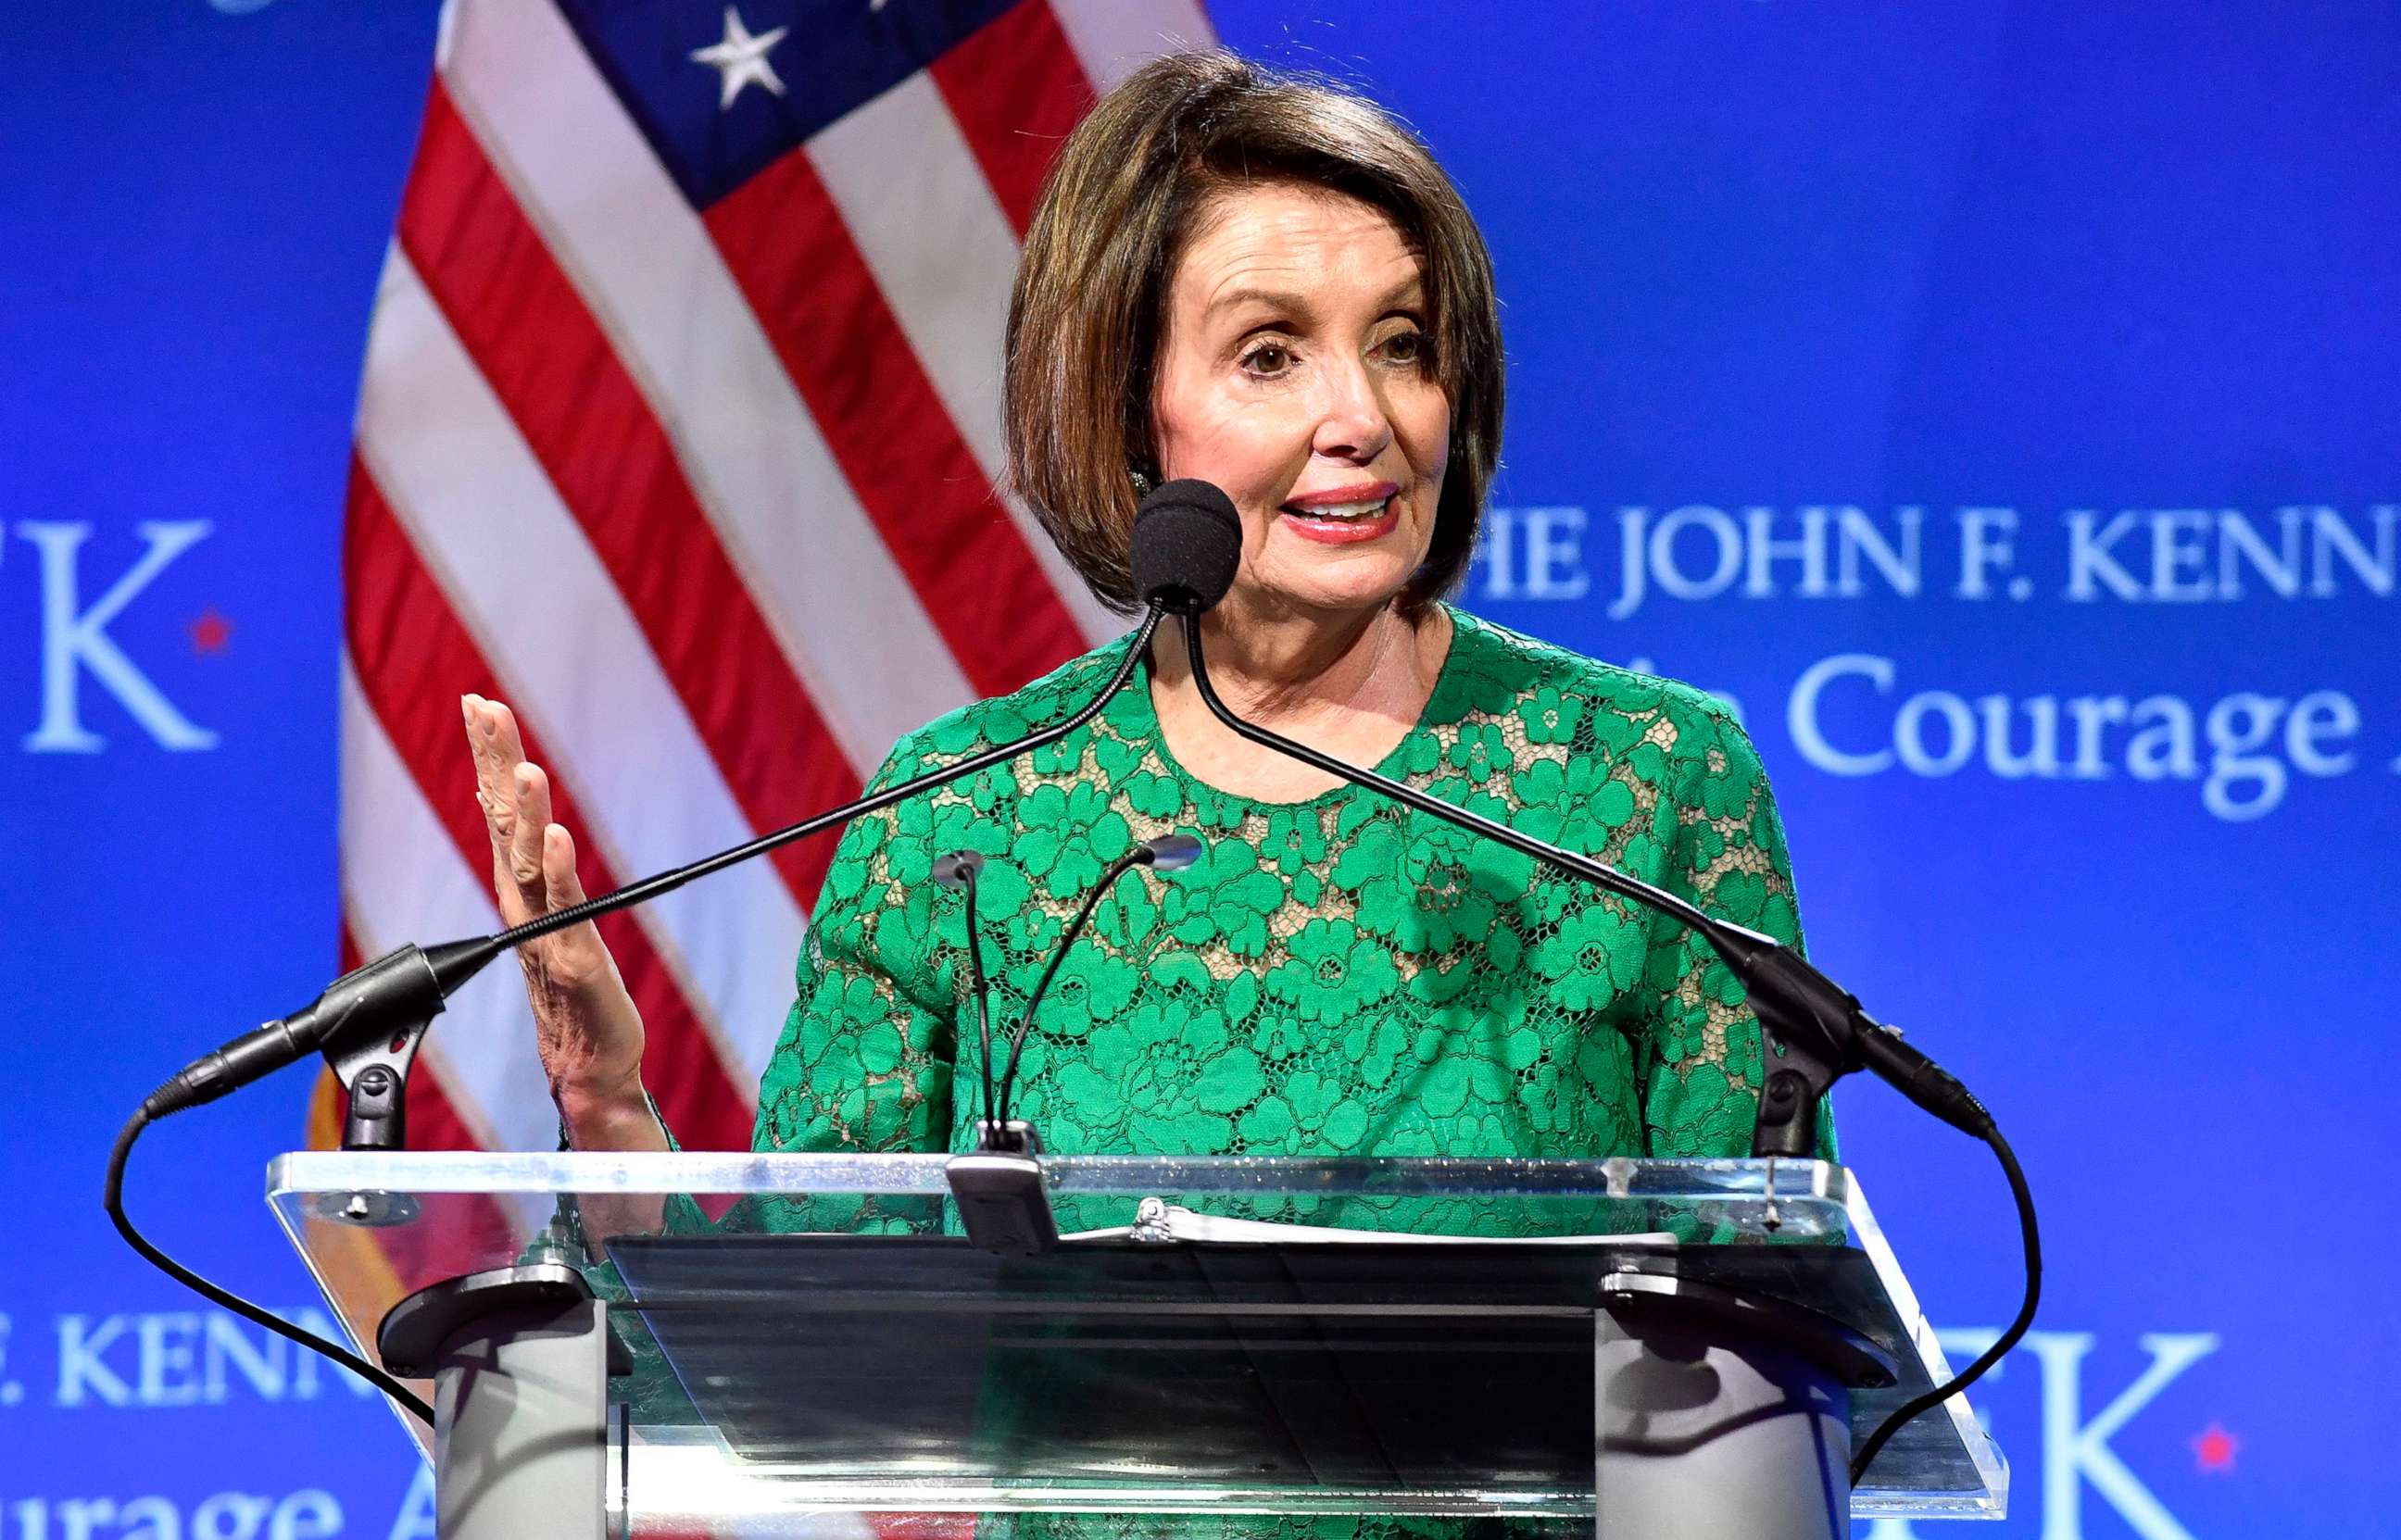 PHOTO: Speaker of the House Nancy Pelosi speaks after she received the 2019 John F. Kennedy Profile in Courage Award, May 19, 2019, at the John F. Kennedy Presidential Library and Museum in Boston.